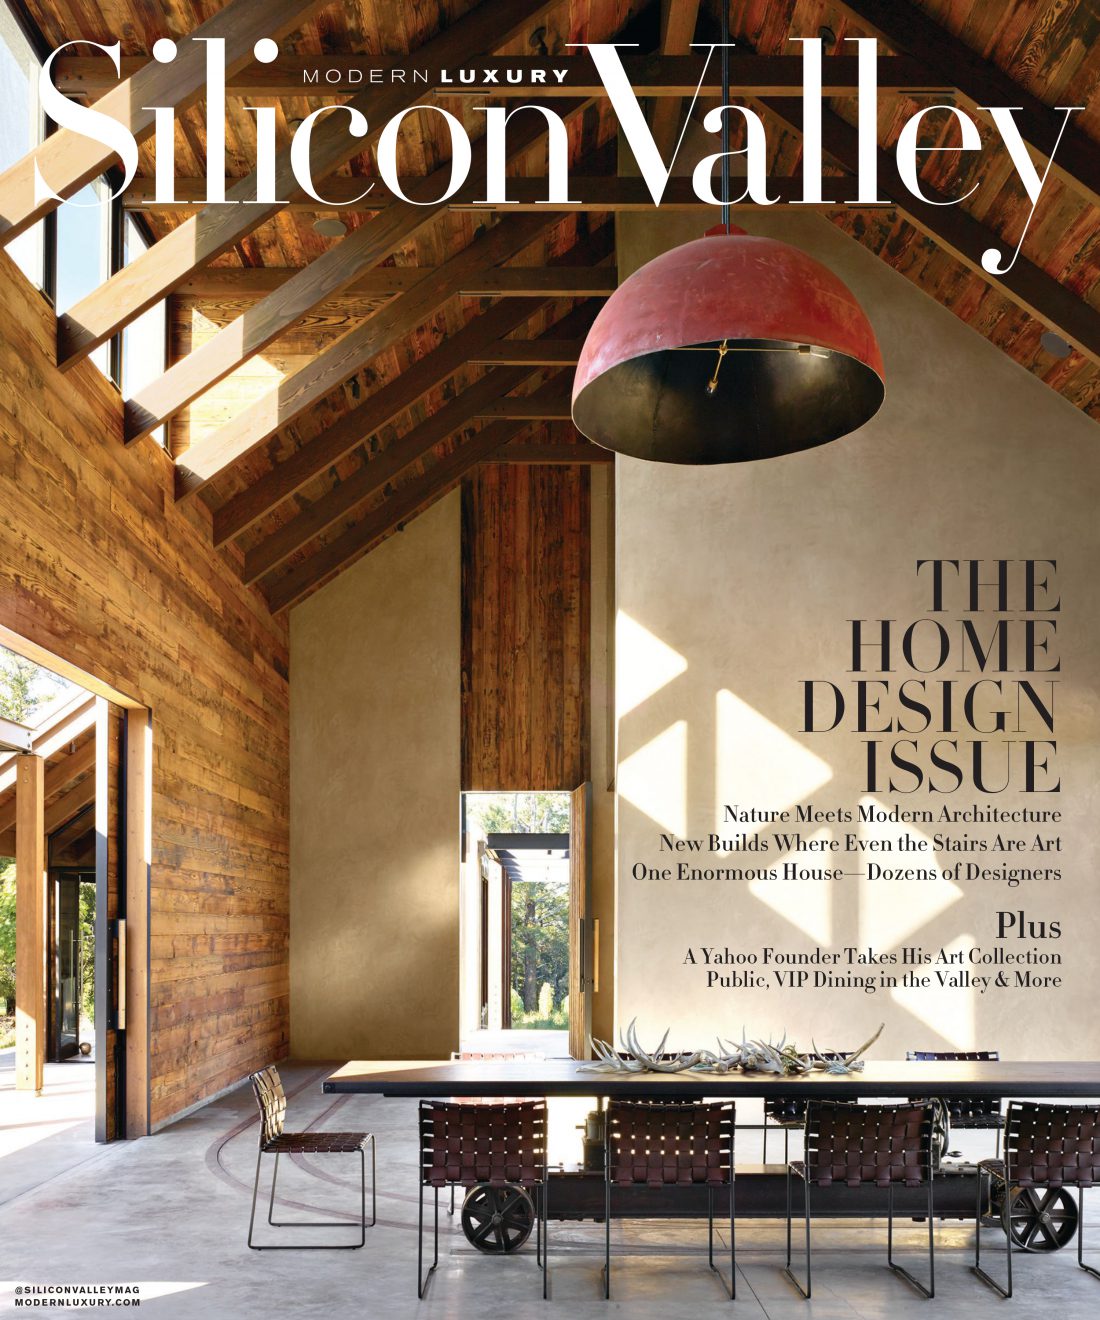 Silicon Valley Magazine puts Field Architecture on the Cover